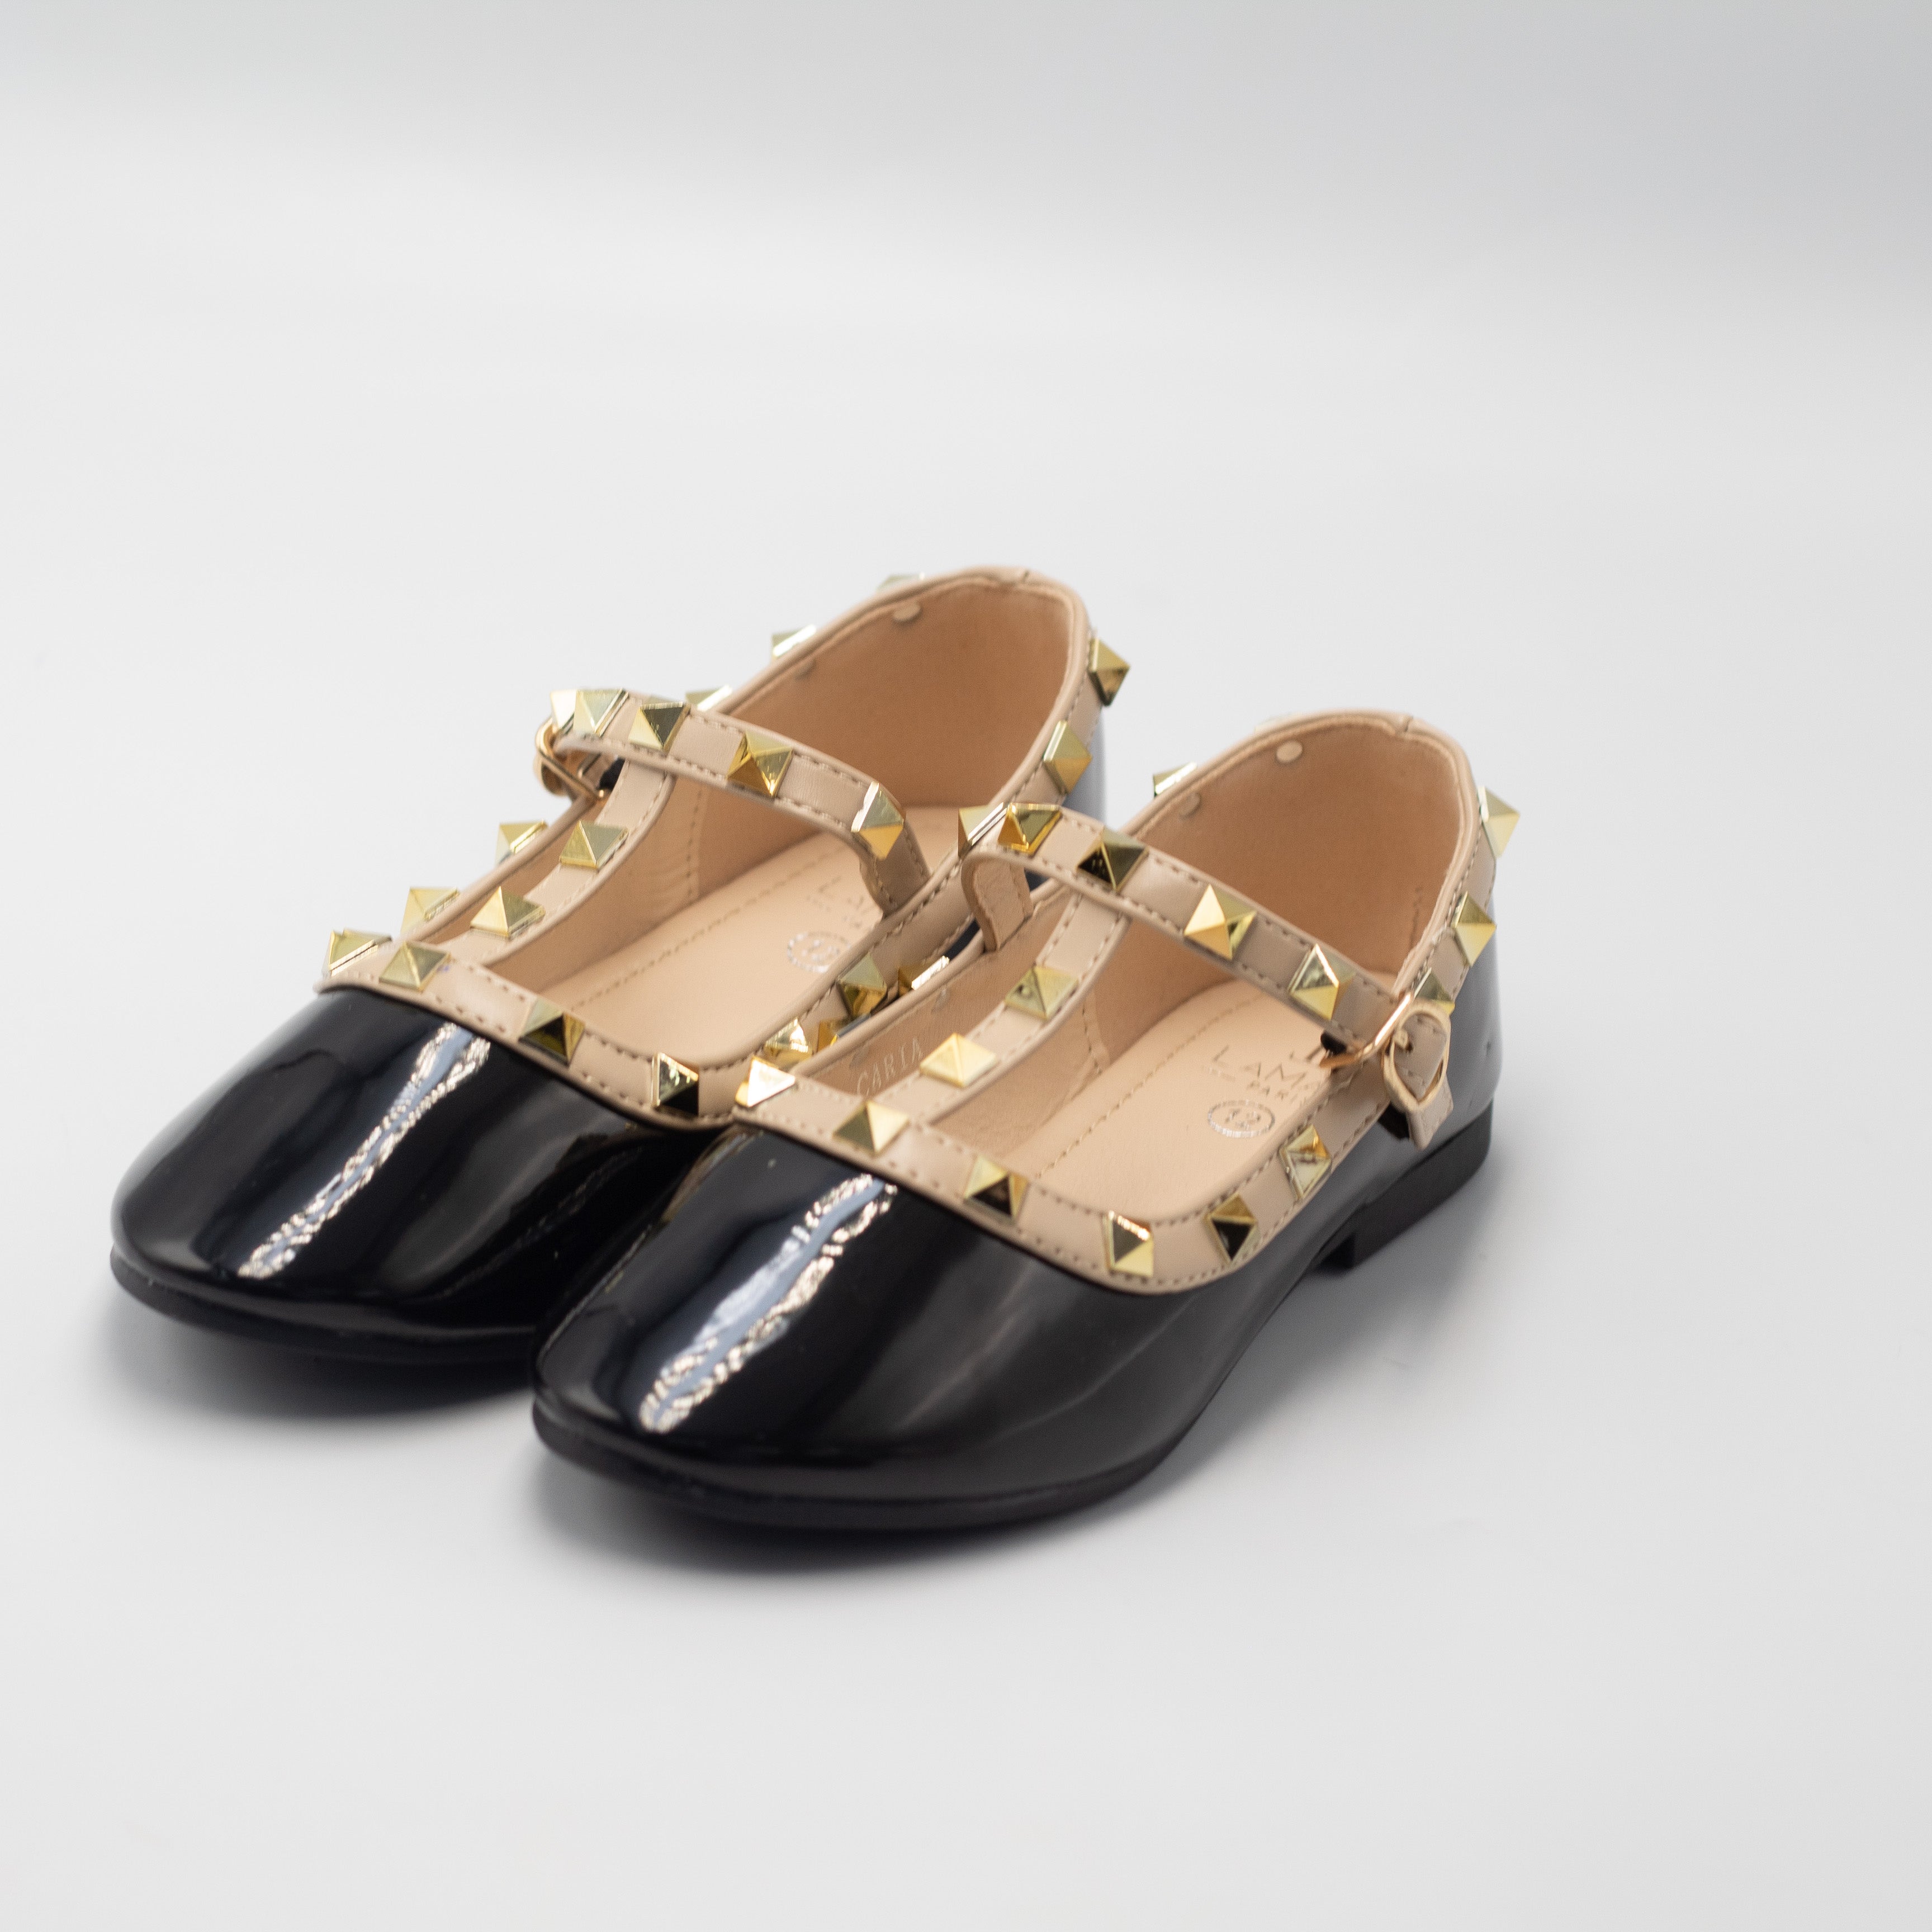 Black inf girls dress pump with studded detail caria